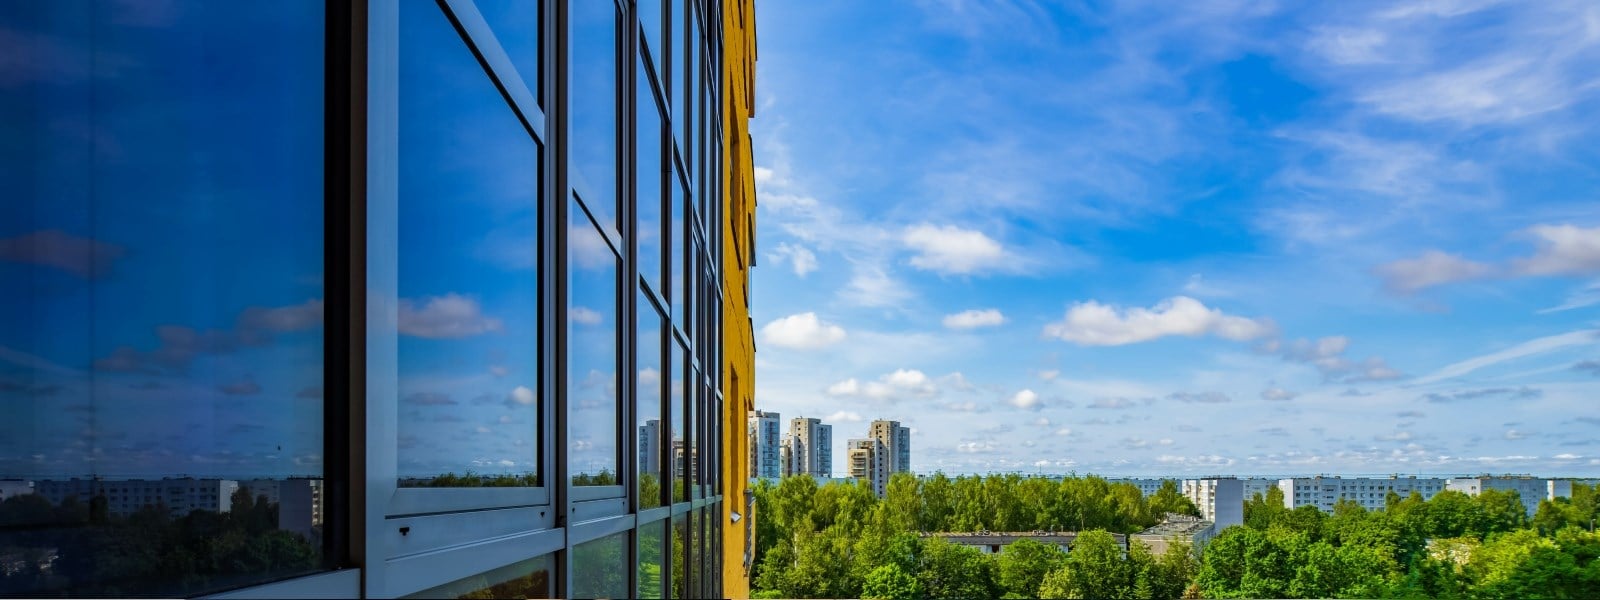 Windows on a tall building with blue sky on the horizon